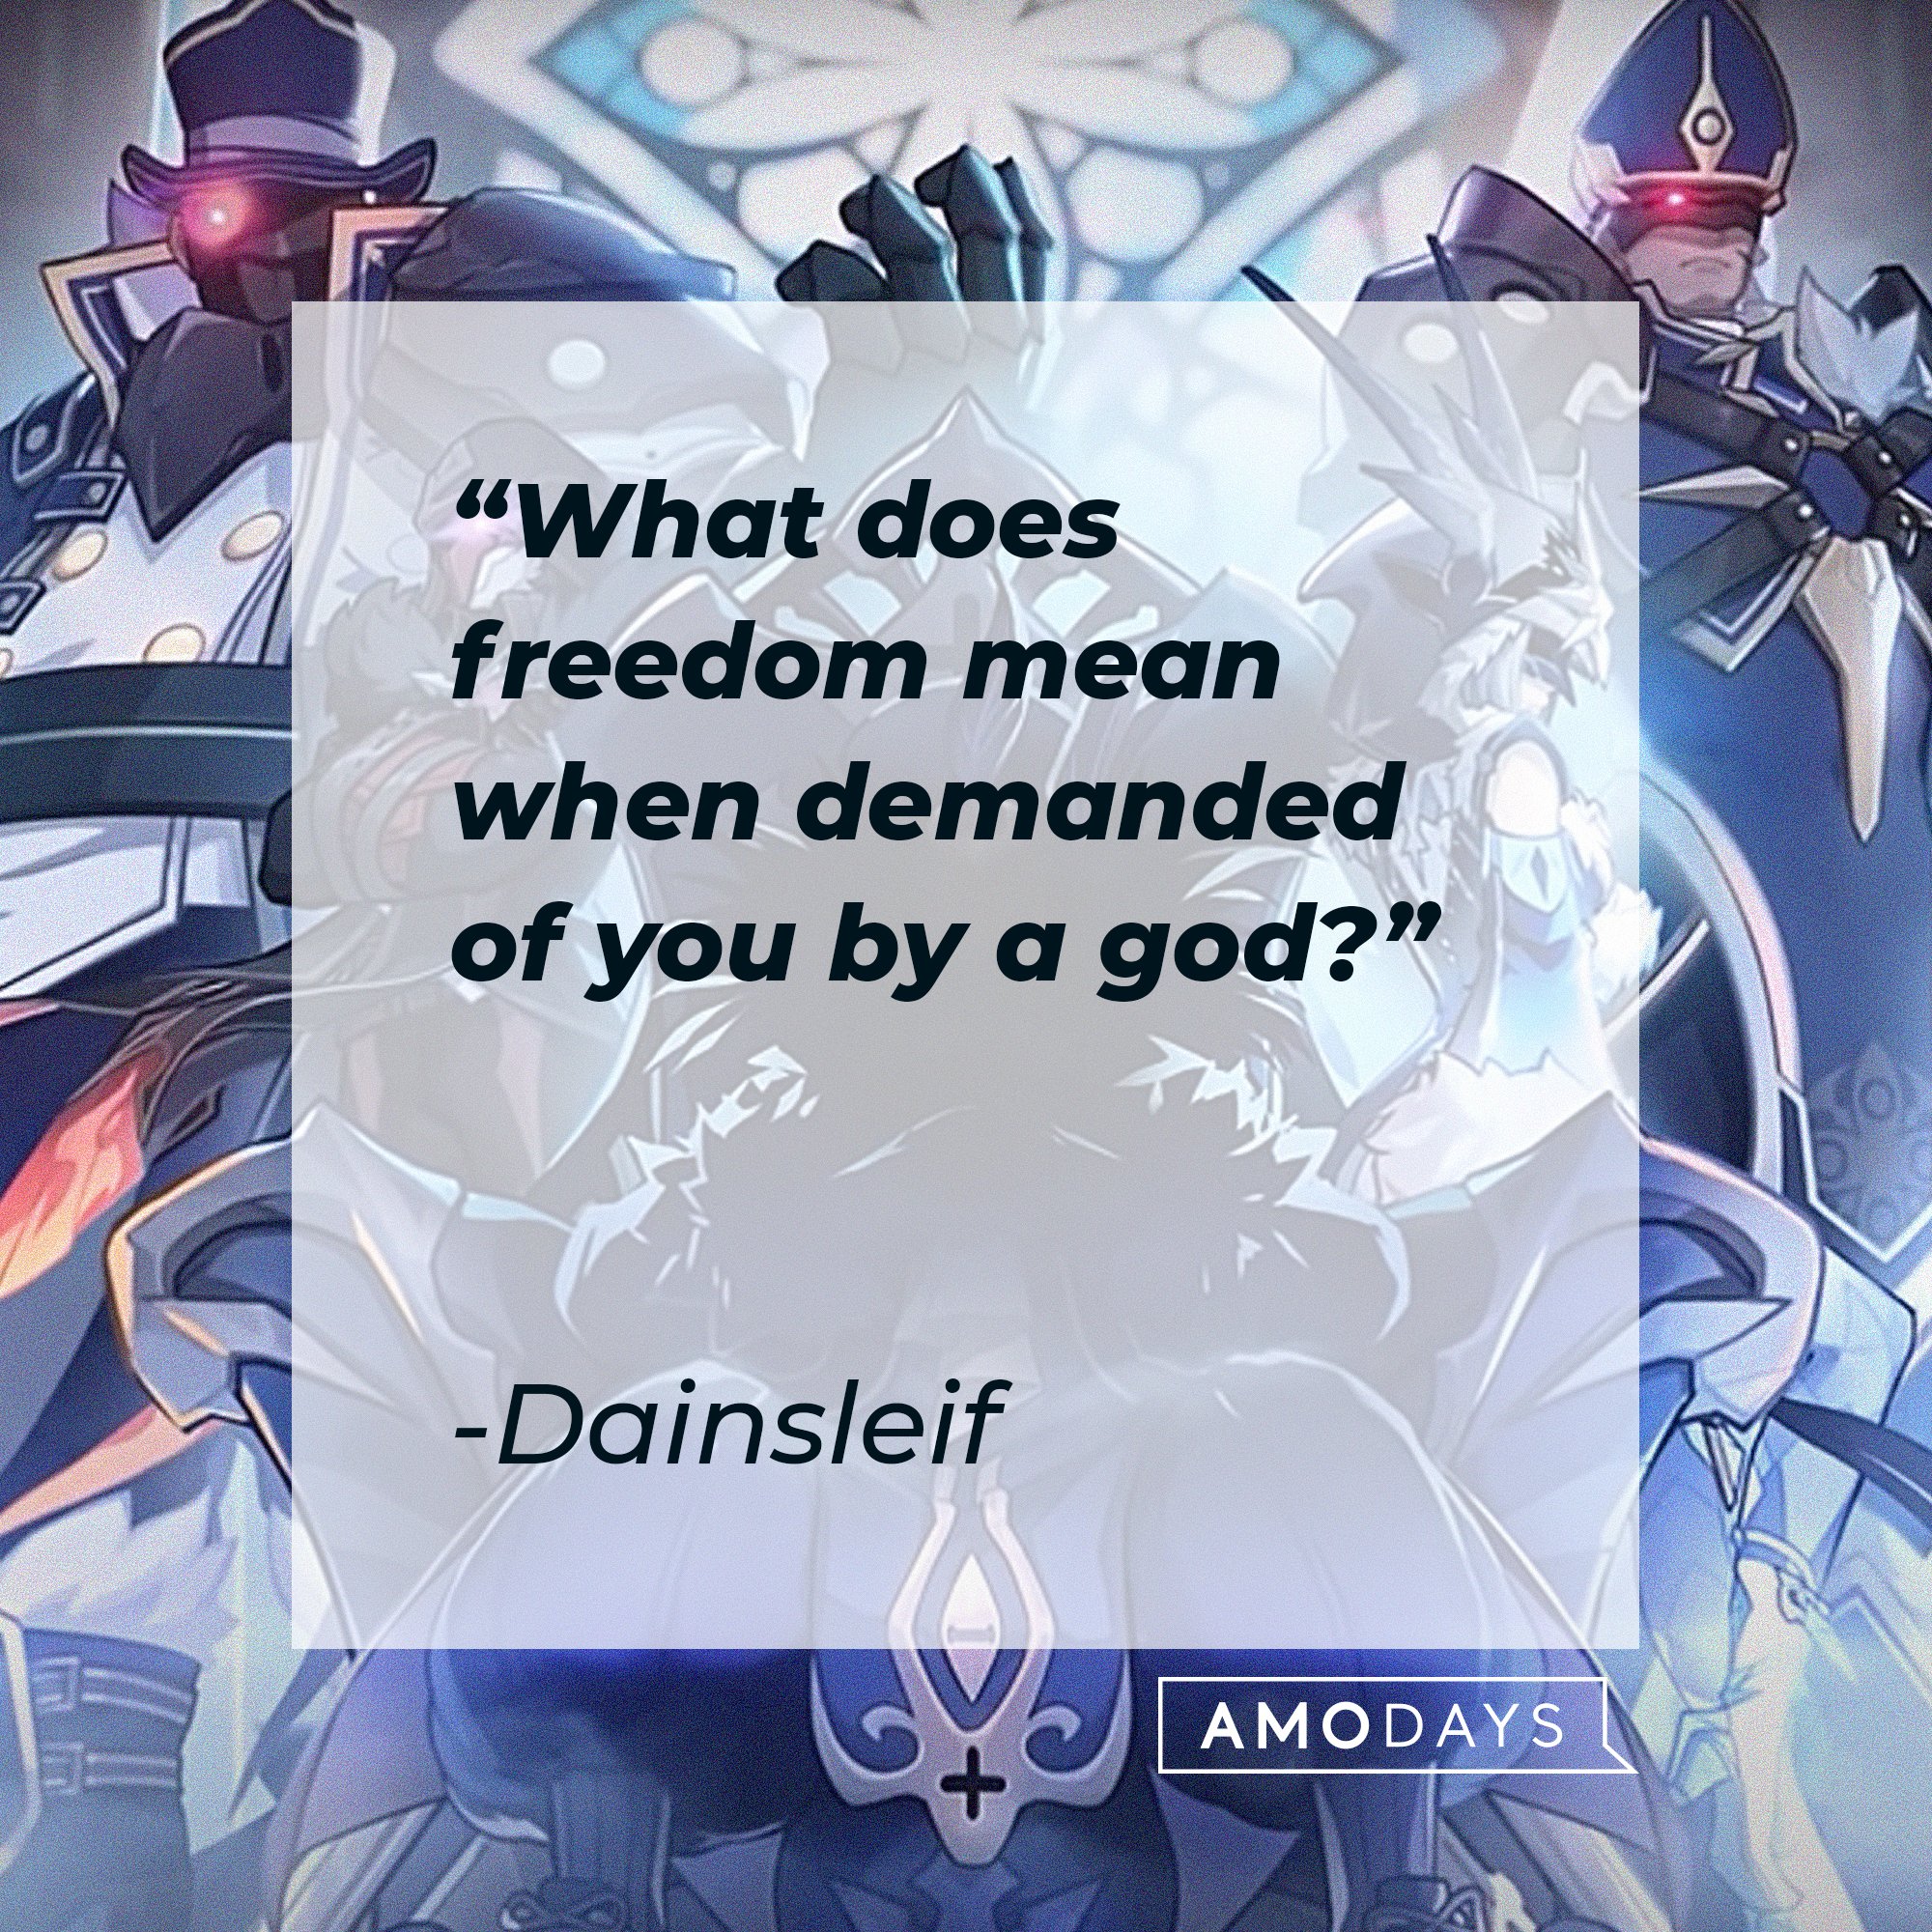 Dainsleif’s quote: "What does freedom mean when demanded of you by a god?" | Image: AmoDays